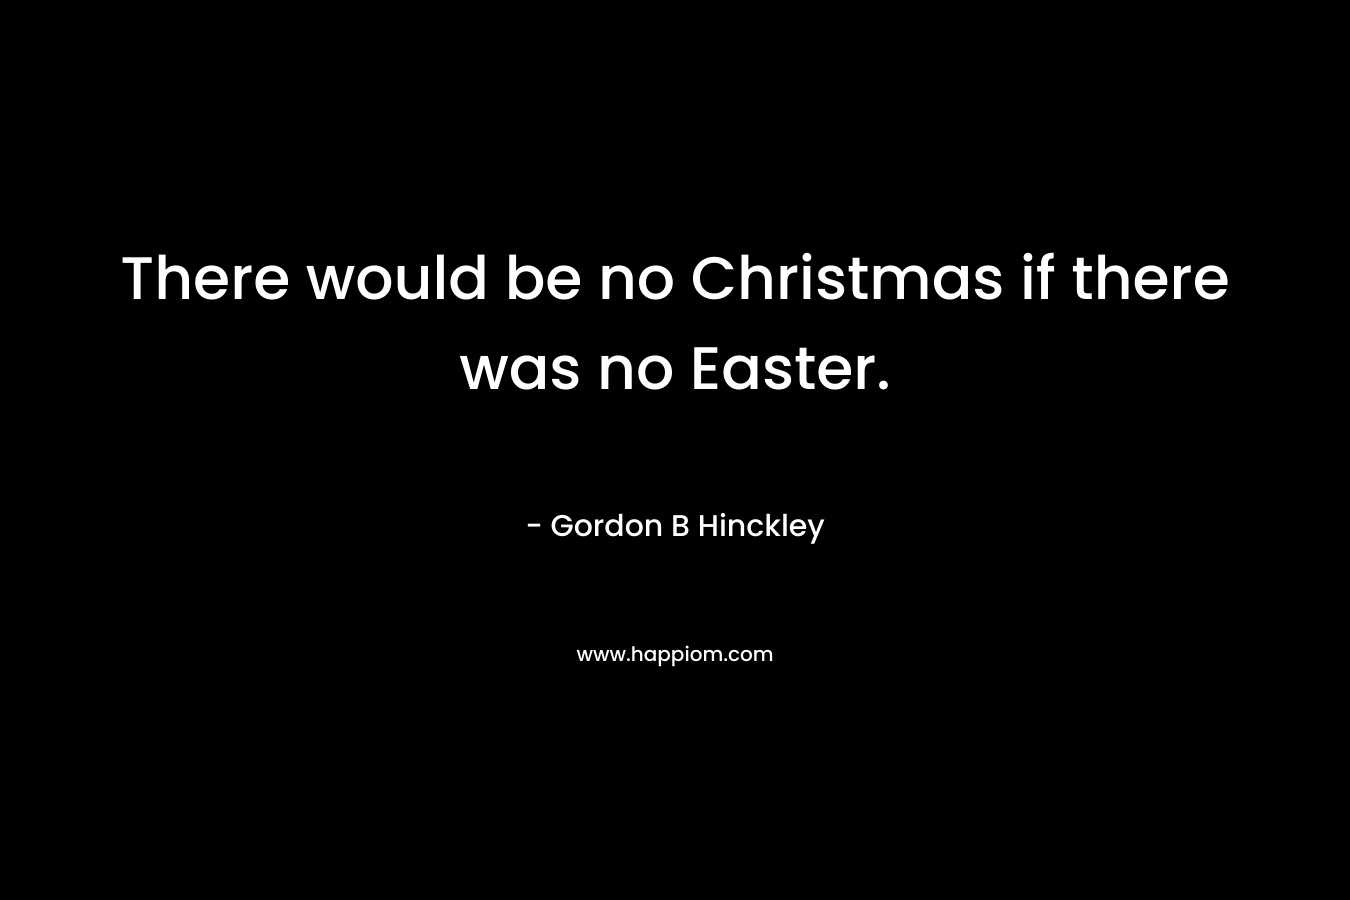 There would be no Christmas if there was no Easter. – Gordon B Hinckley